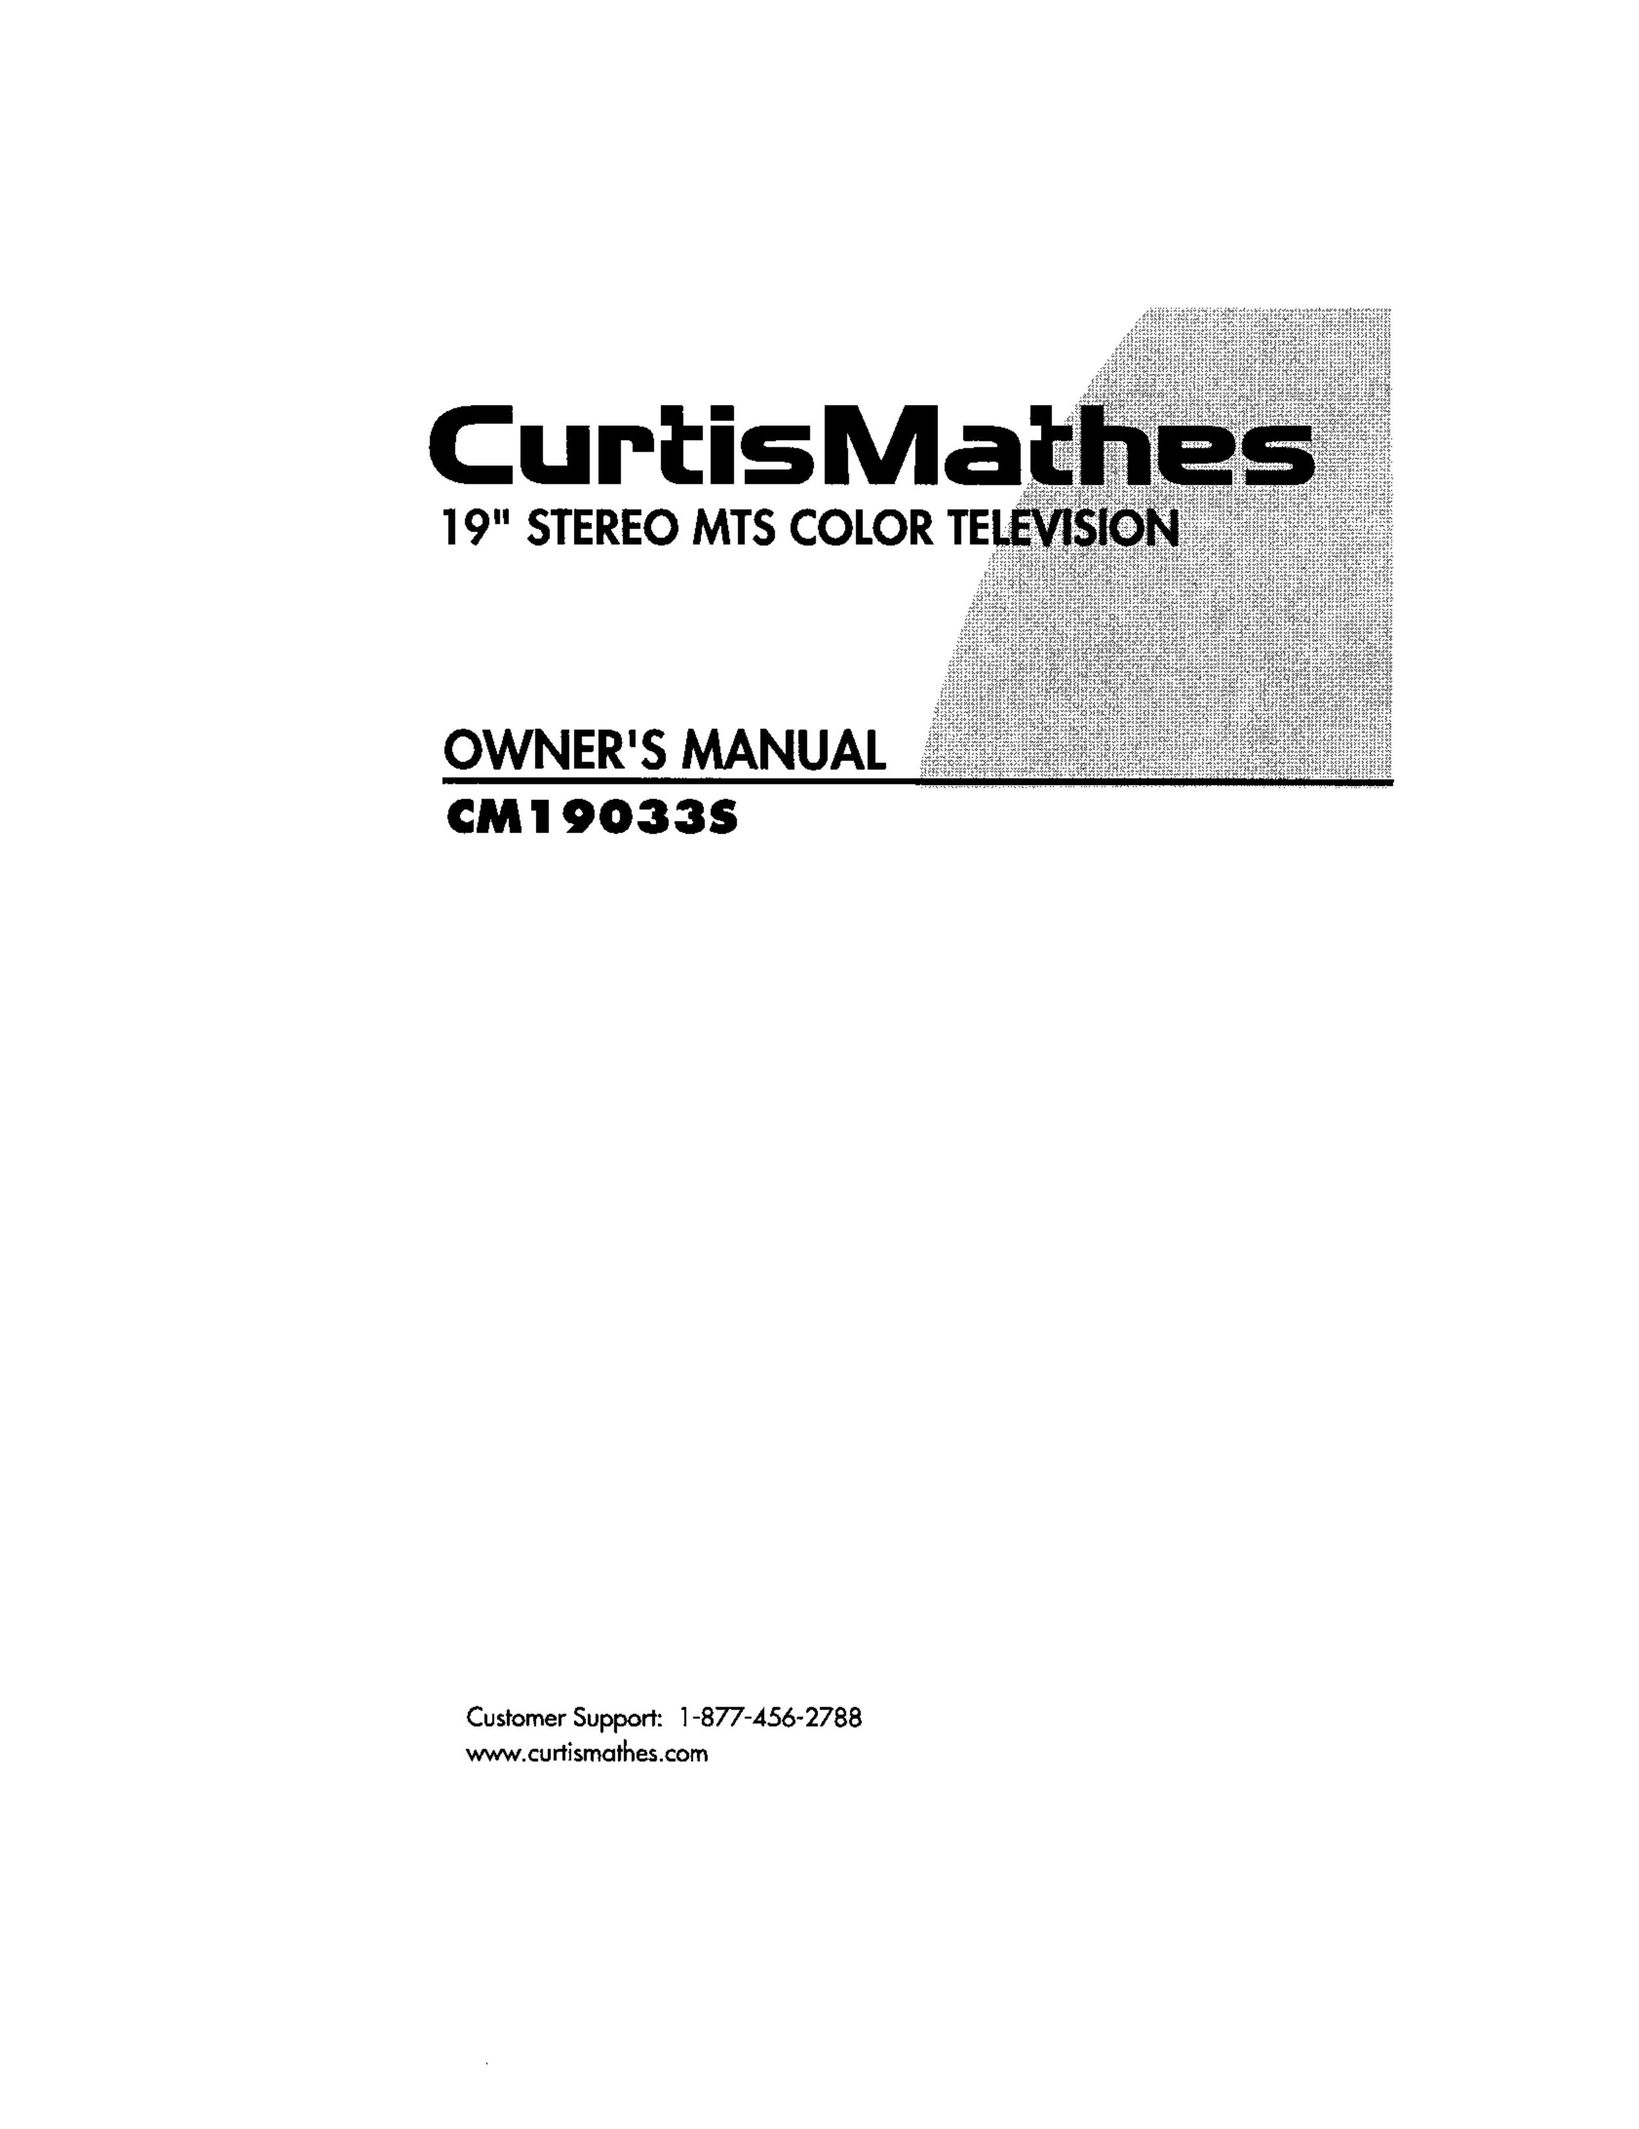 Curtis Mathes CM 19033S CRT Television User Manual